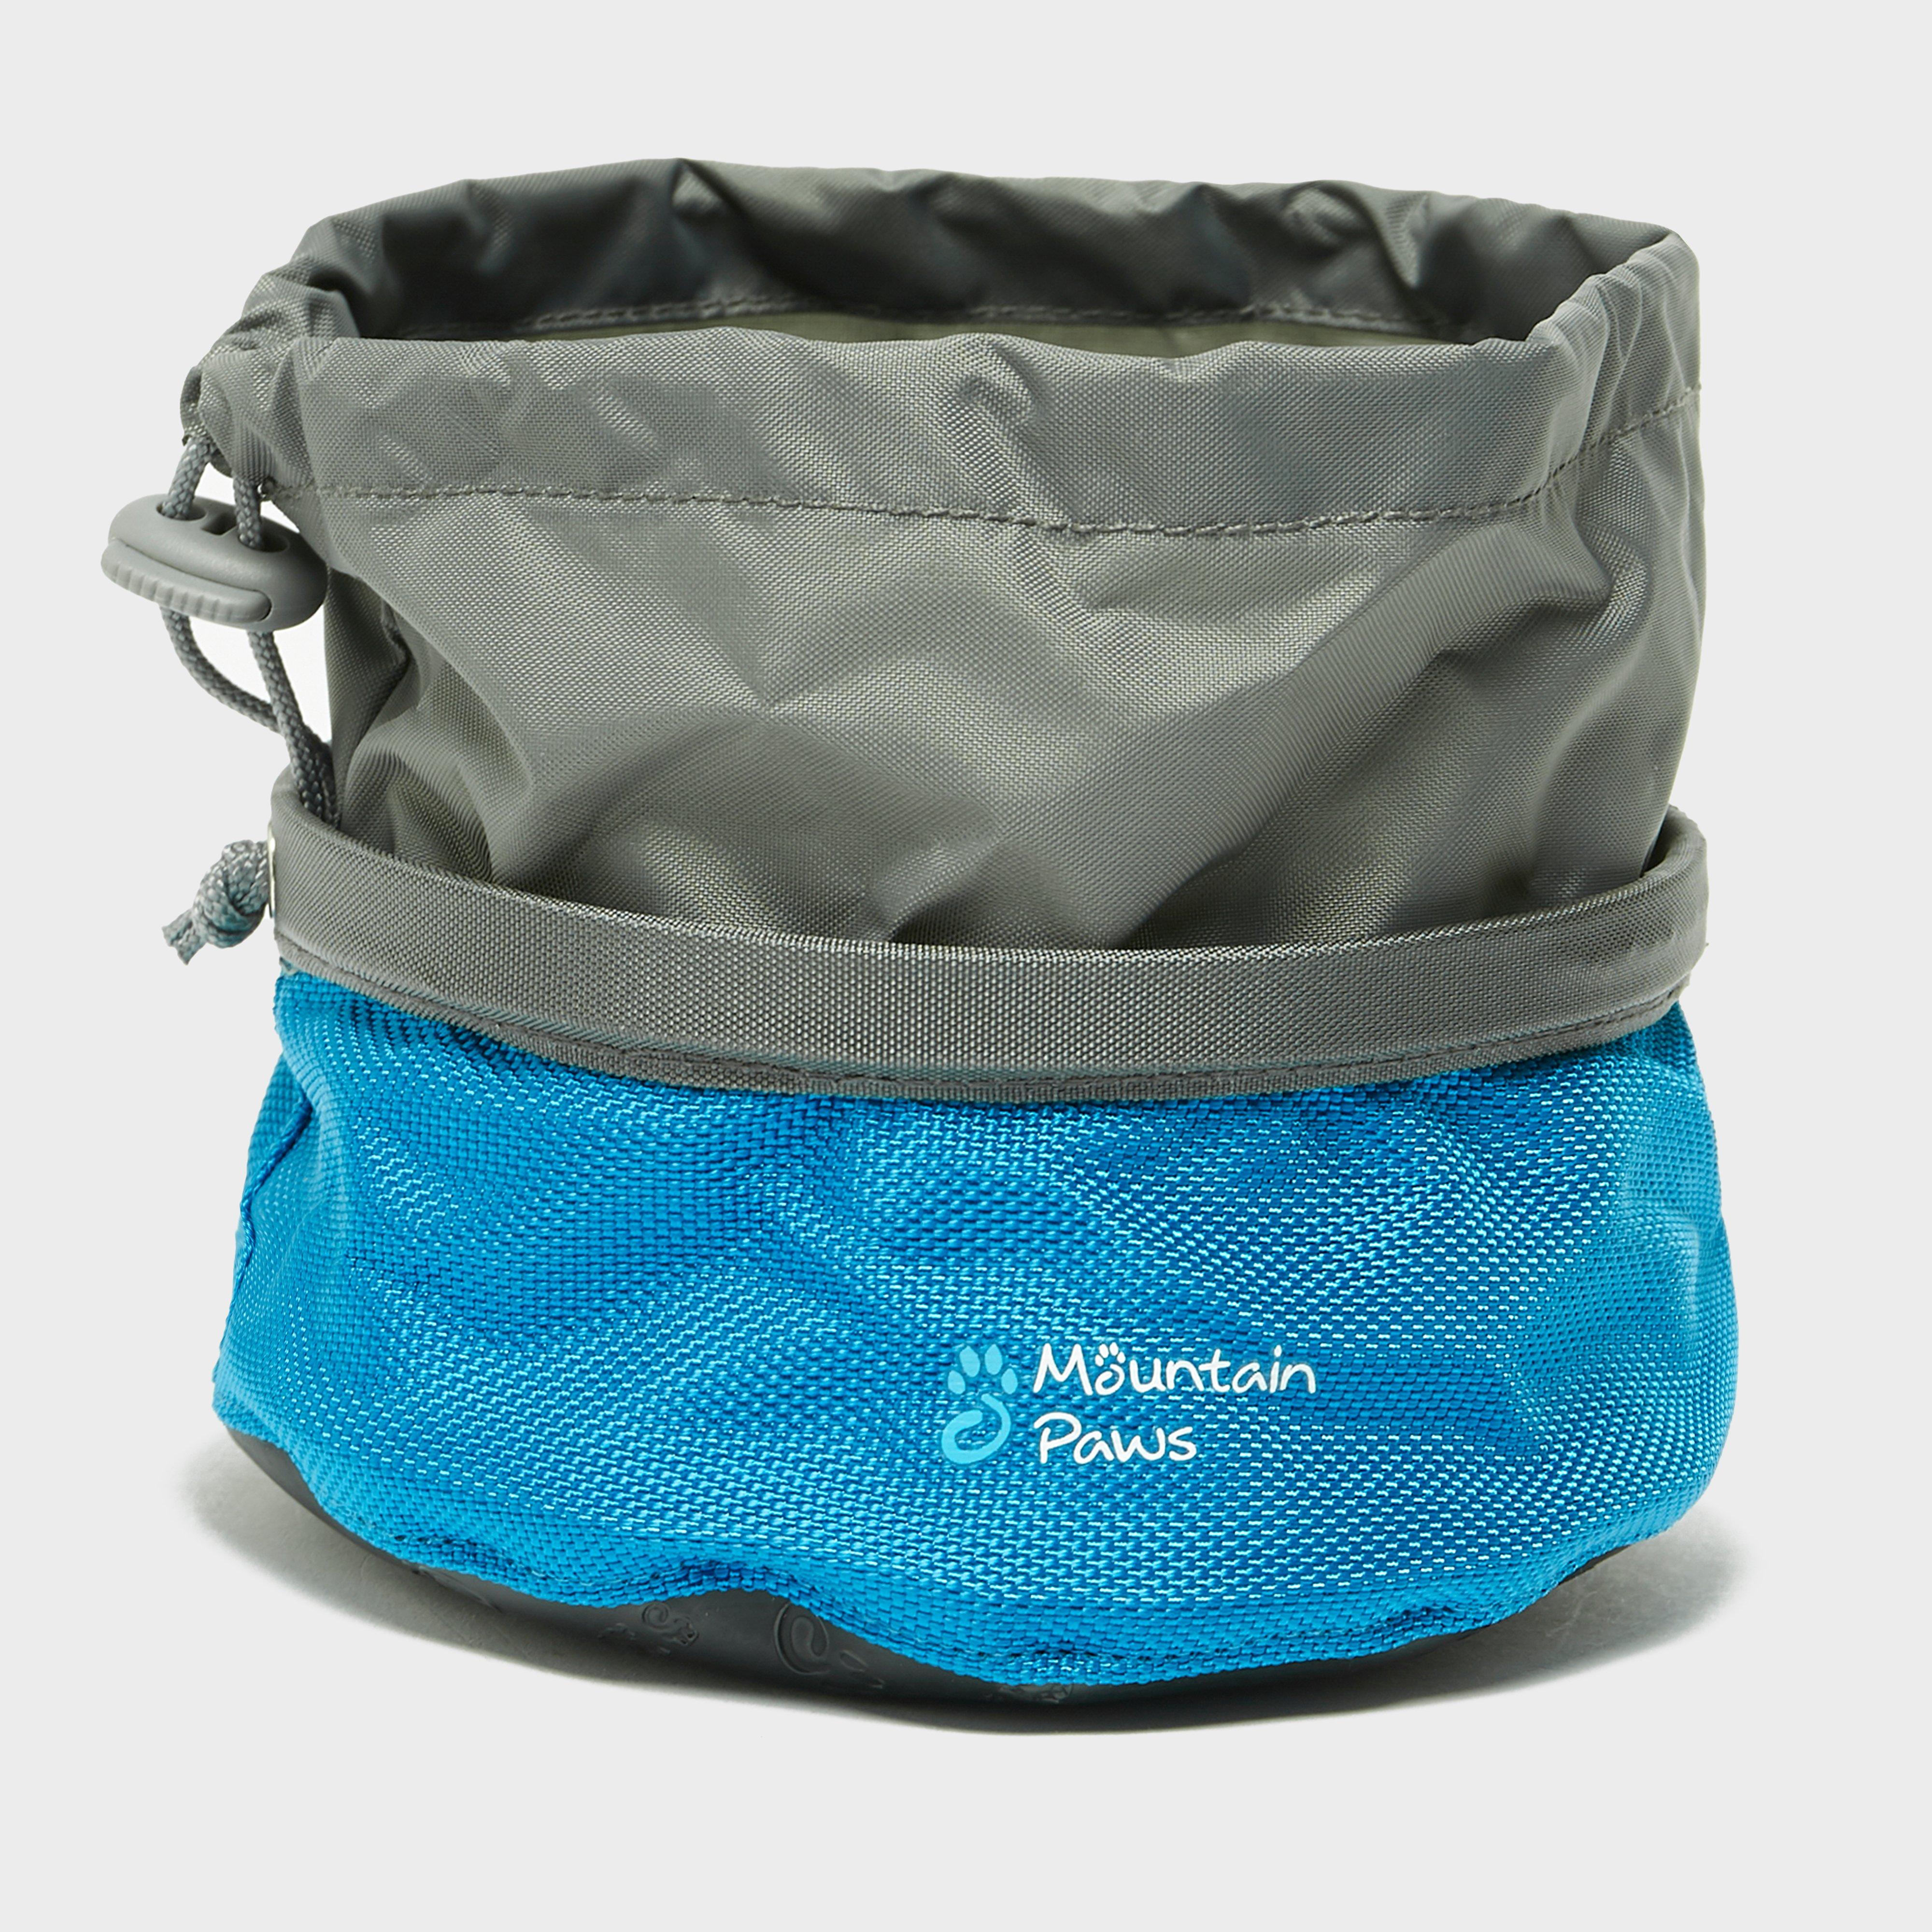 Image of Mountain Paws Dog Food Bowl (Small) - Blue/Grey, Blue/Grey